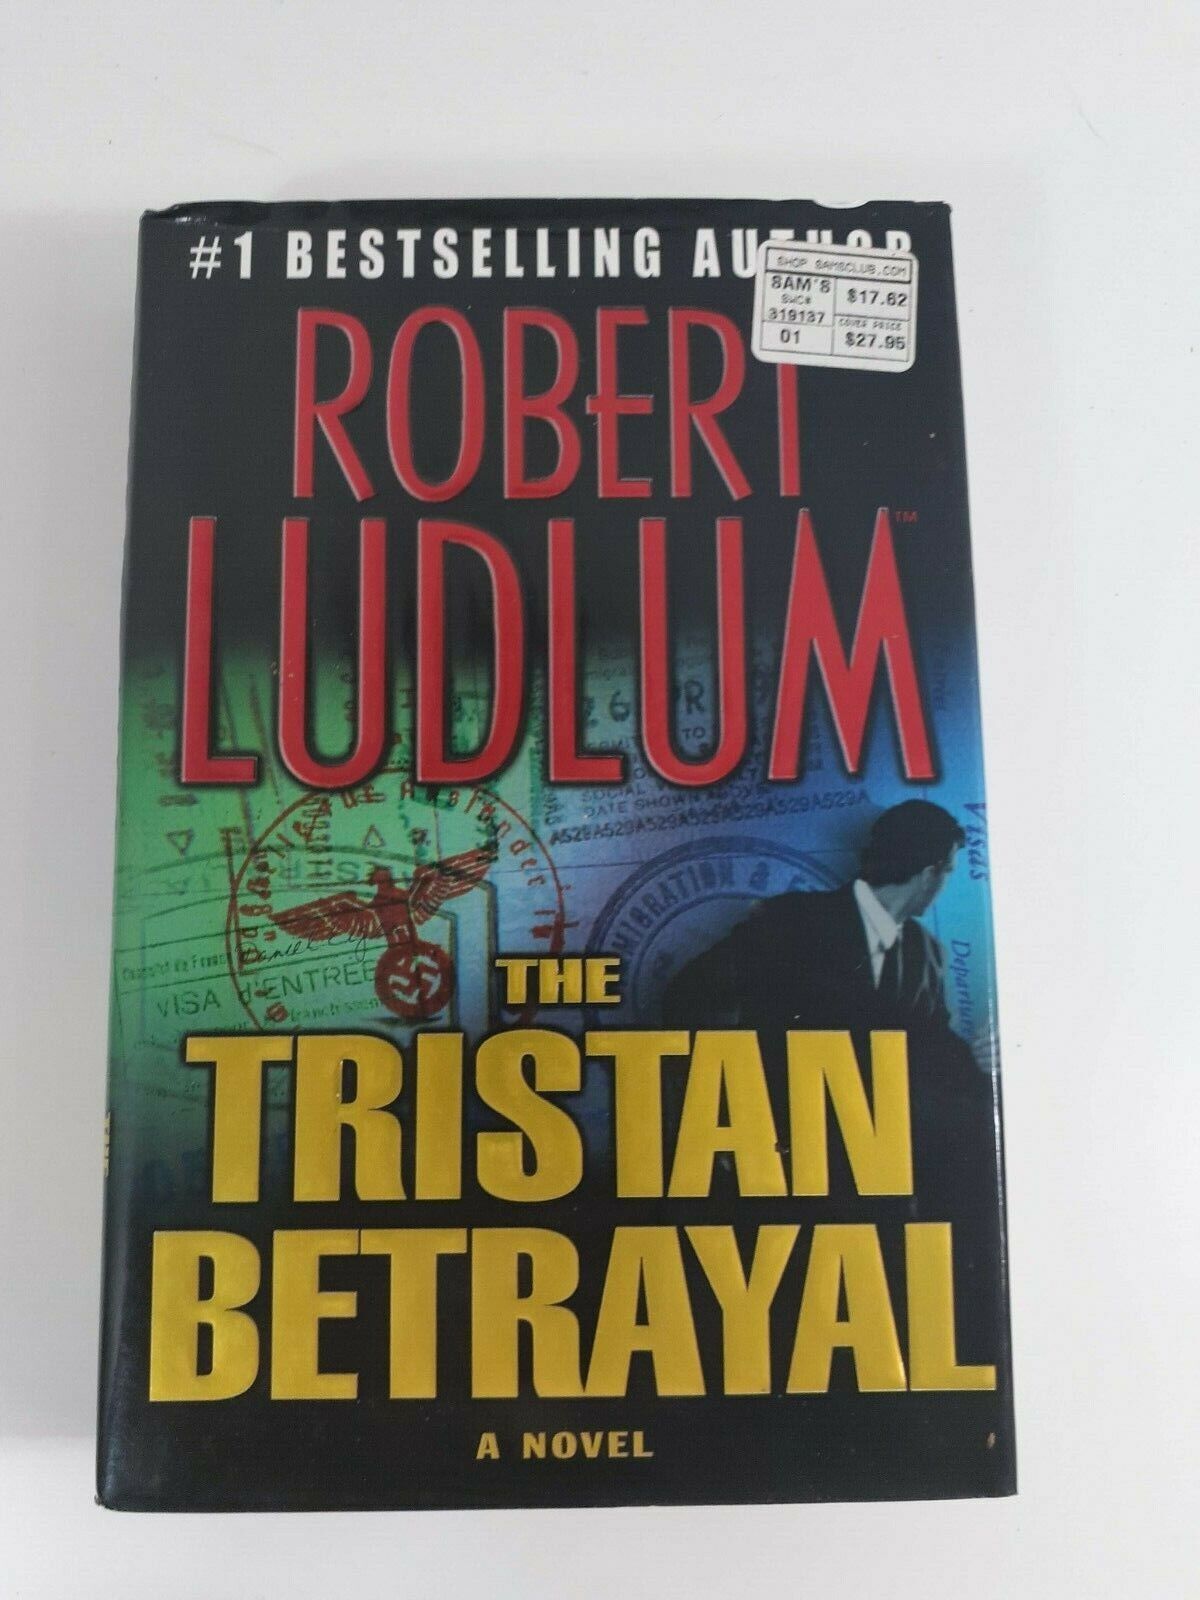 Primary image for The Tristan Betrayal by Robert Ludlum (2003, Hardcover, 1st ed novel